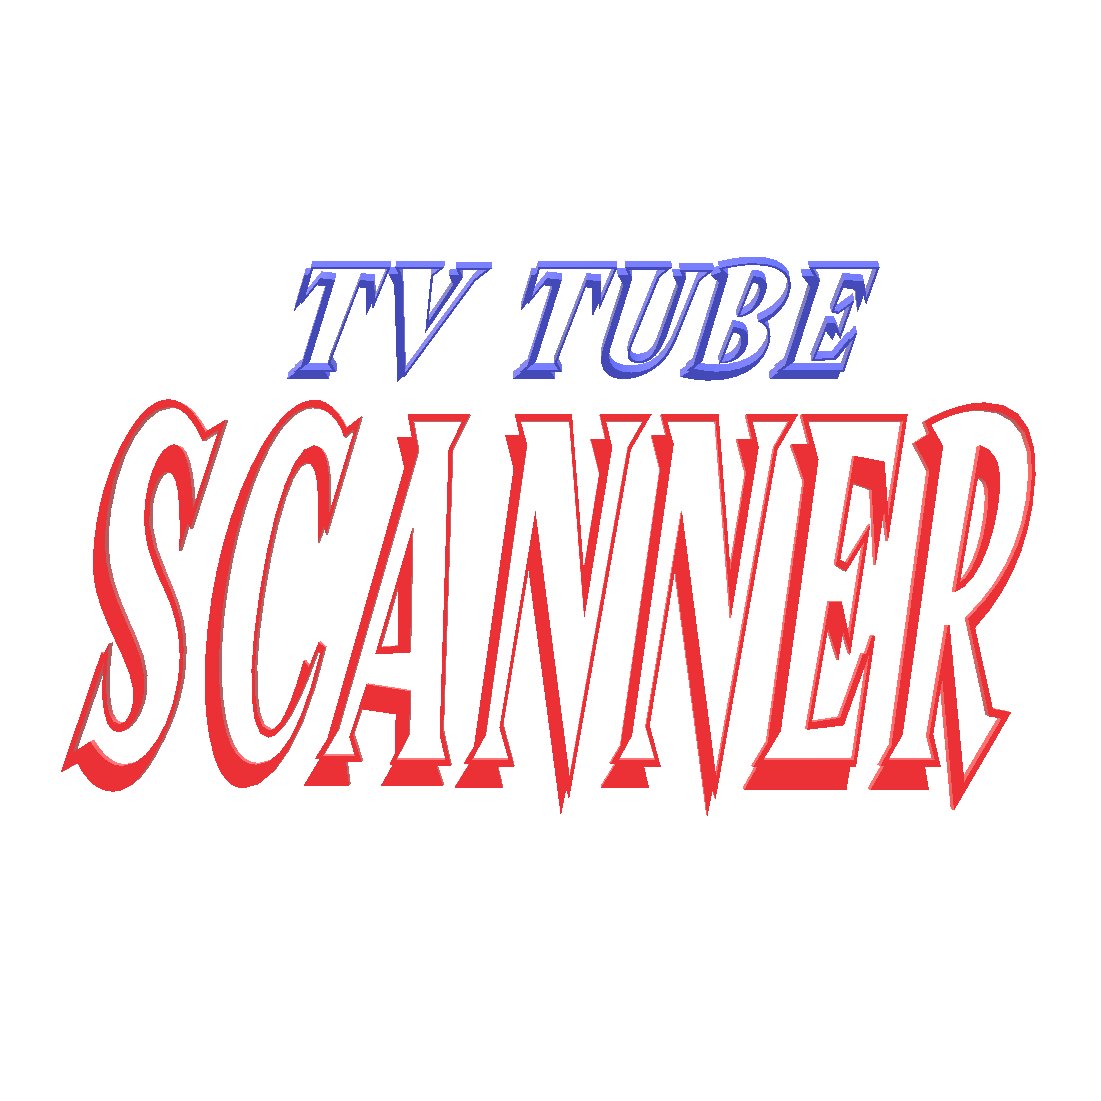 TV TUBE SCANNER is a scanner report in mainly will report breaking news in Snohomish County Washington. NOT AN OFFICAL AGENCY.